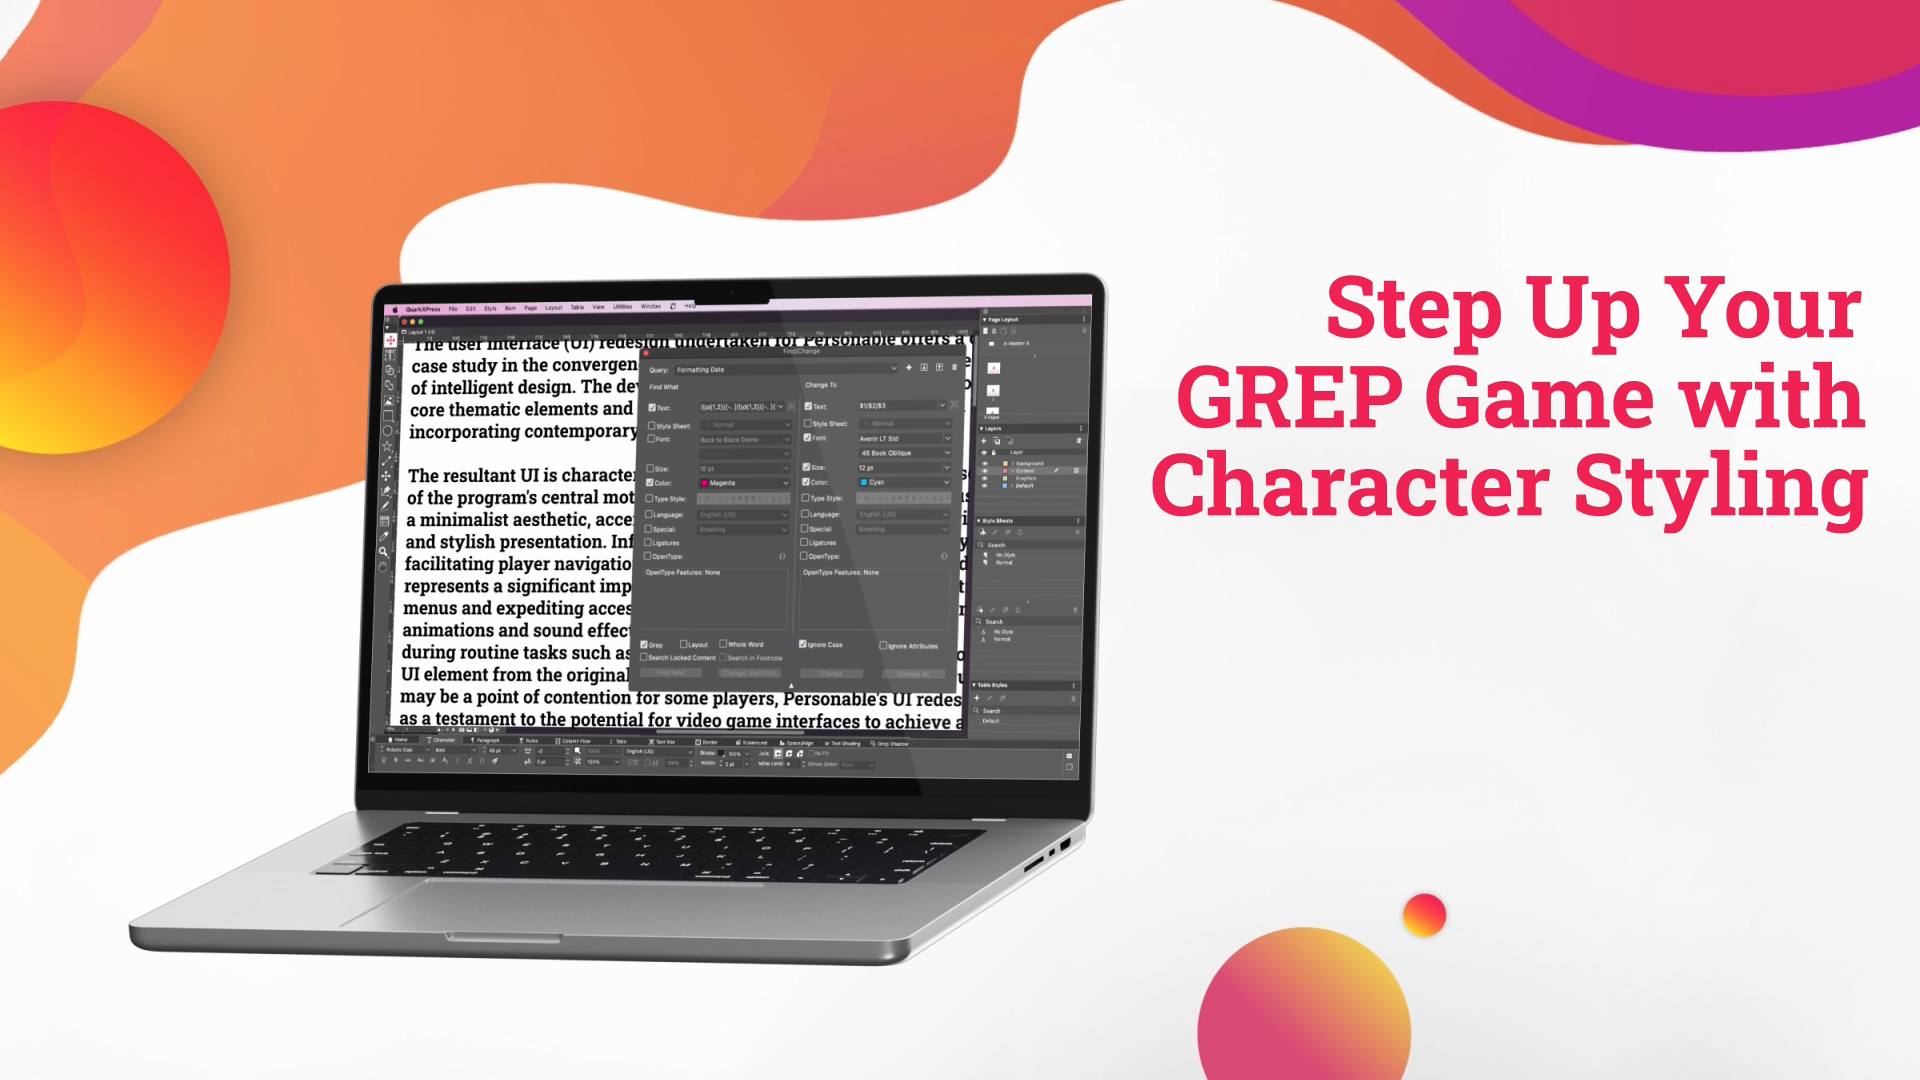 Step Up Your GREP Game with Character Styling